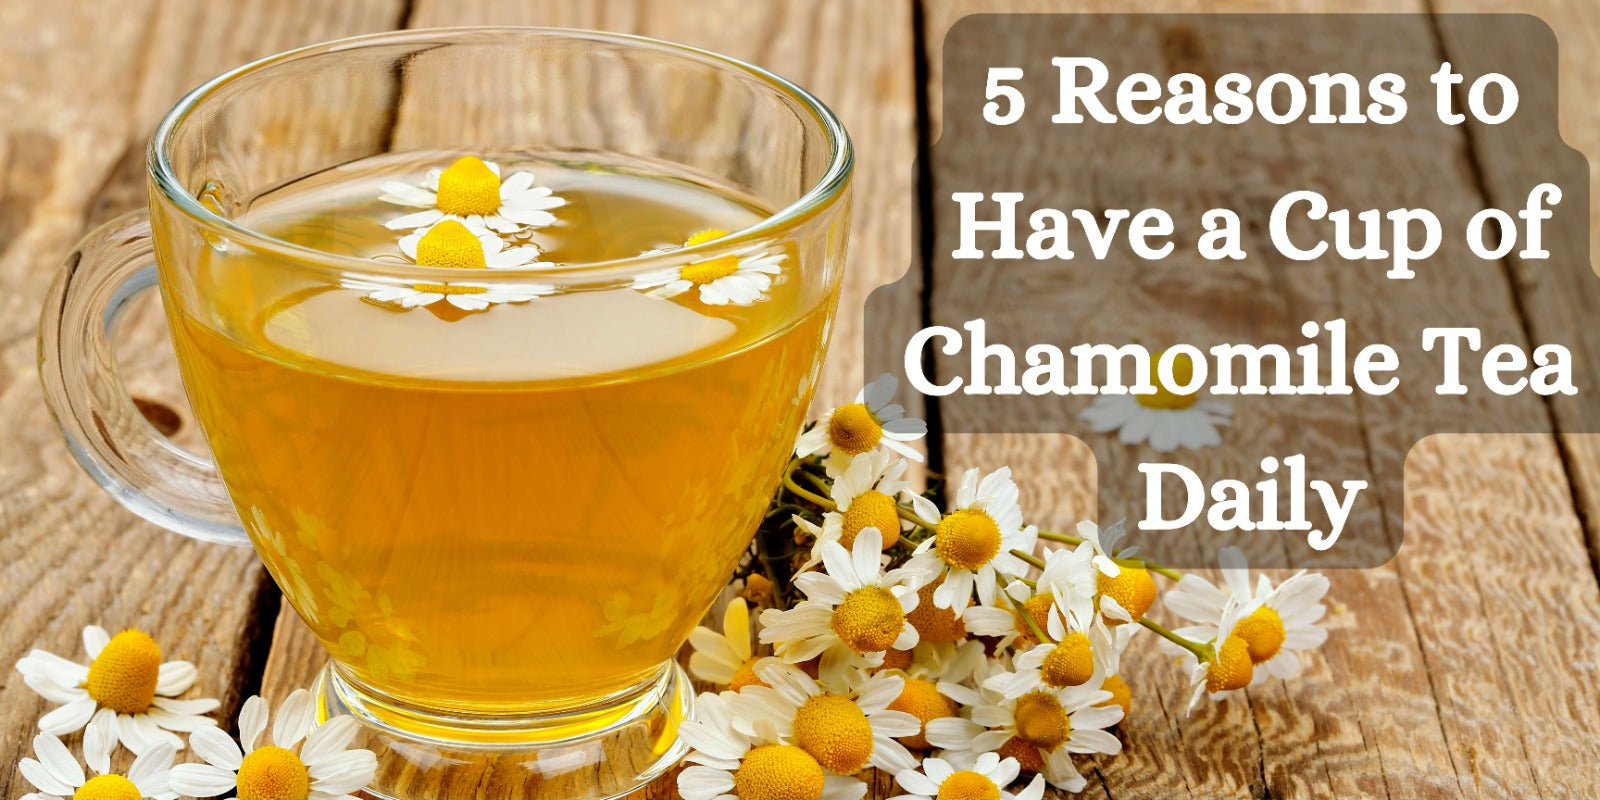 5 Reasons to Have a Cup of Chamomile Tea Daily